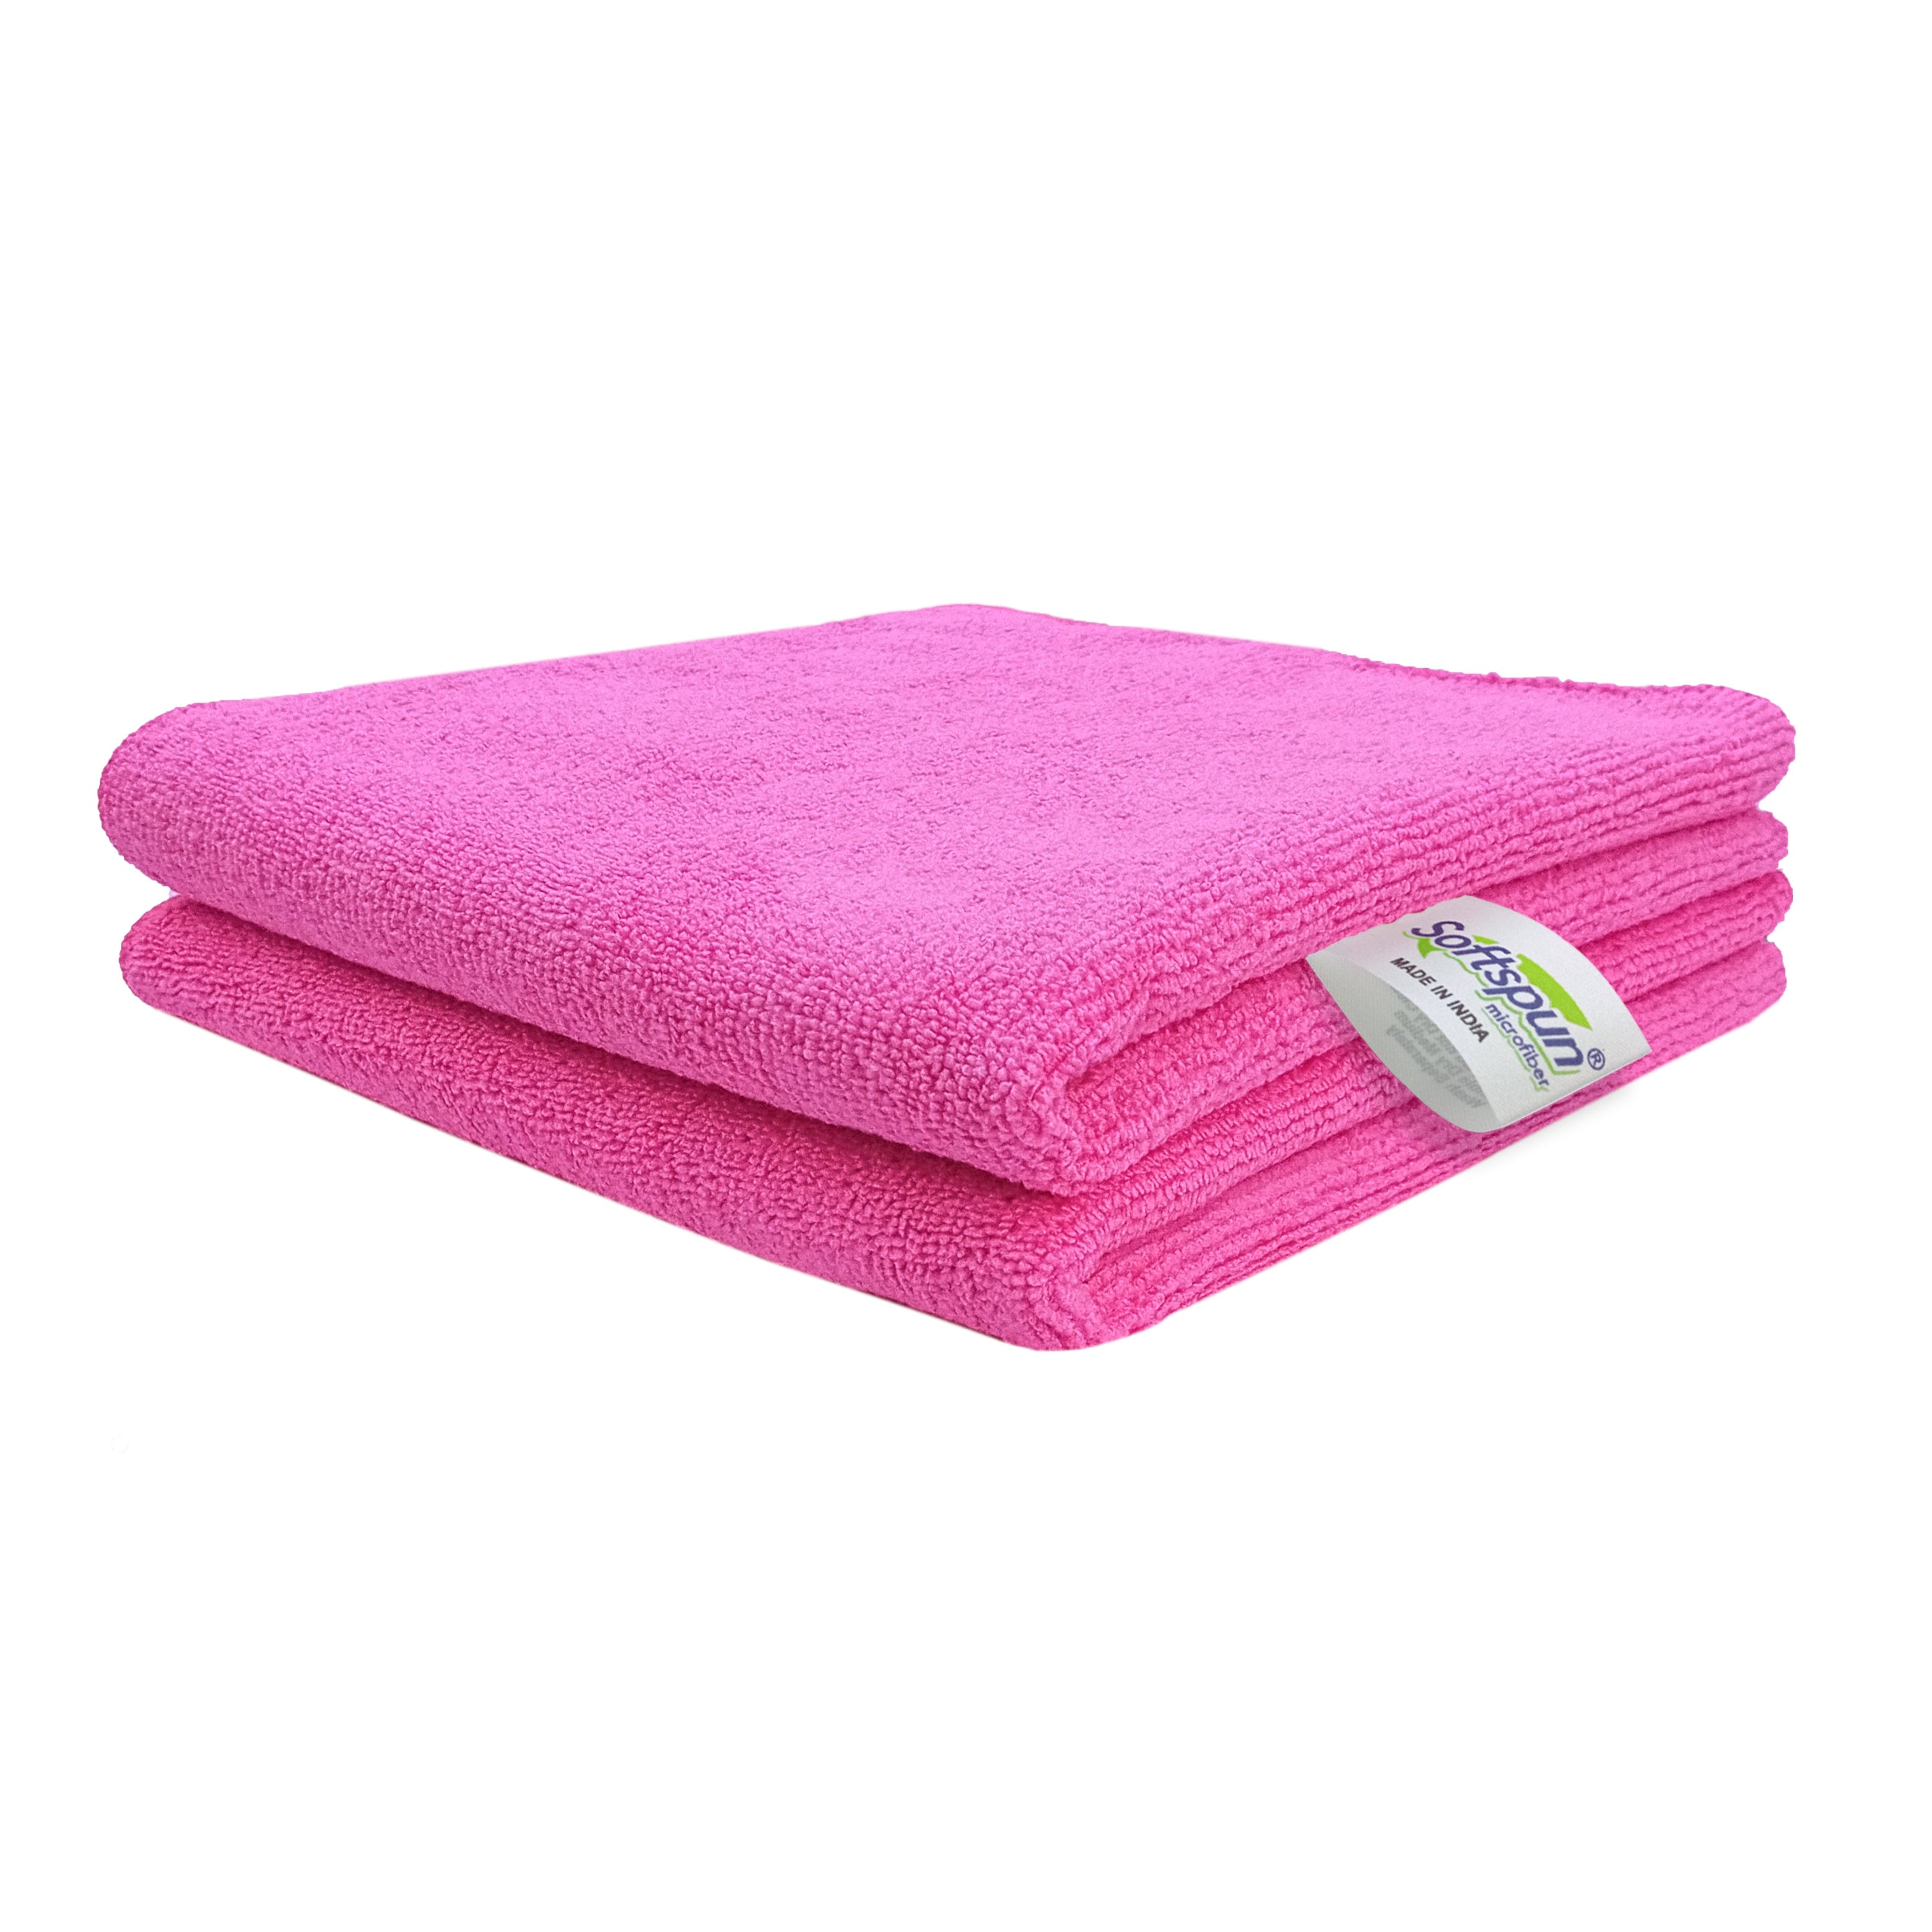 SOFTSPUN Microfiber Cleaning Cloths, Towel Set 340 GSM. Highly Absorbent, Lint and Streak Free, Multi-Purpose Wash Cloth for Kitchen, Car, Window, Stainless Steel, Silverware.